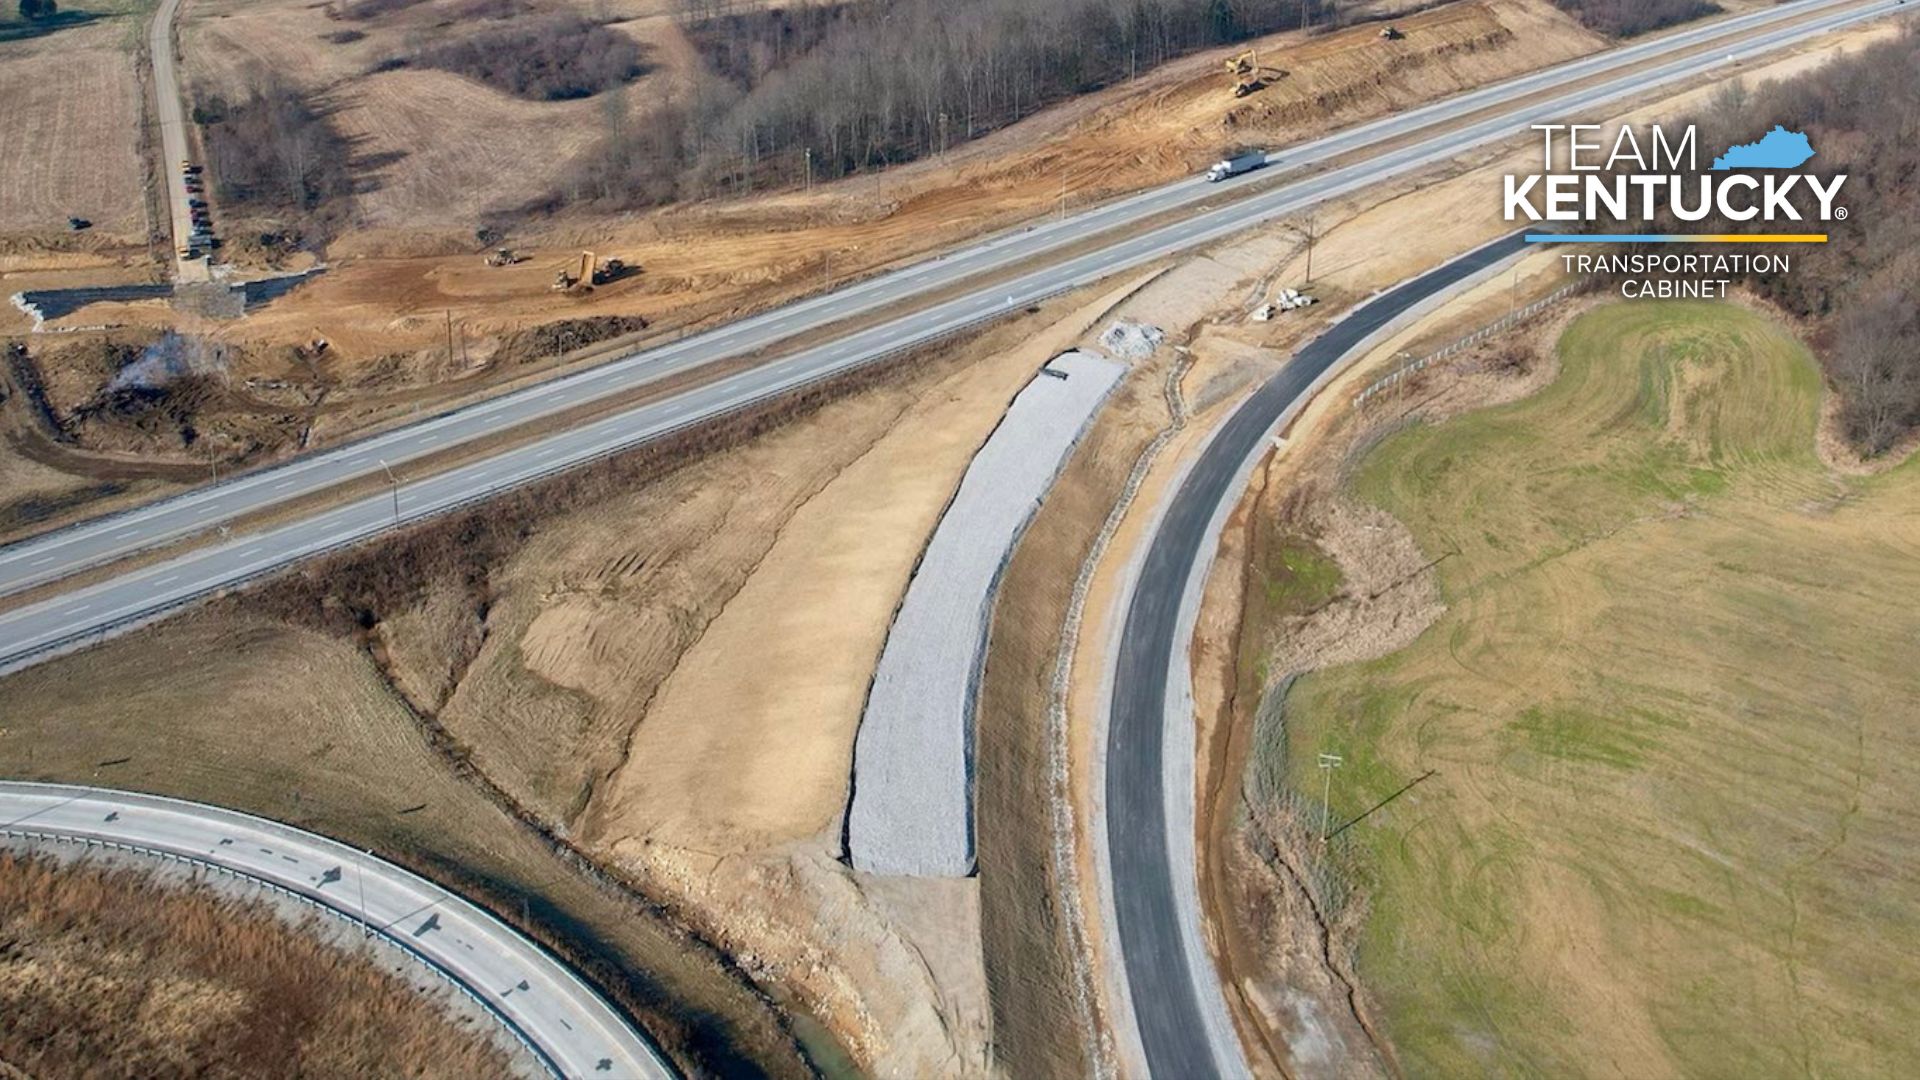 Hartford KY Interchange overview of construction from drone image